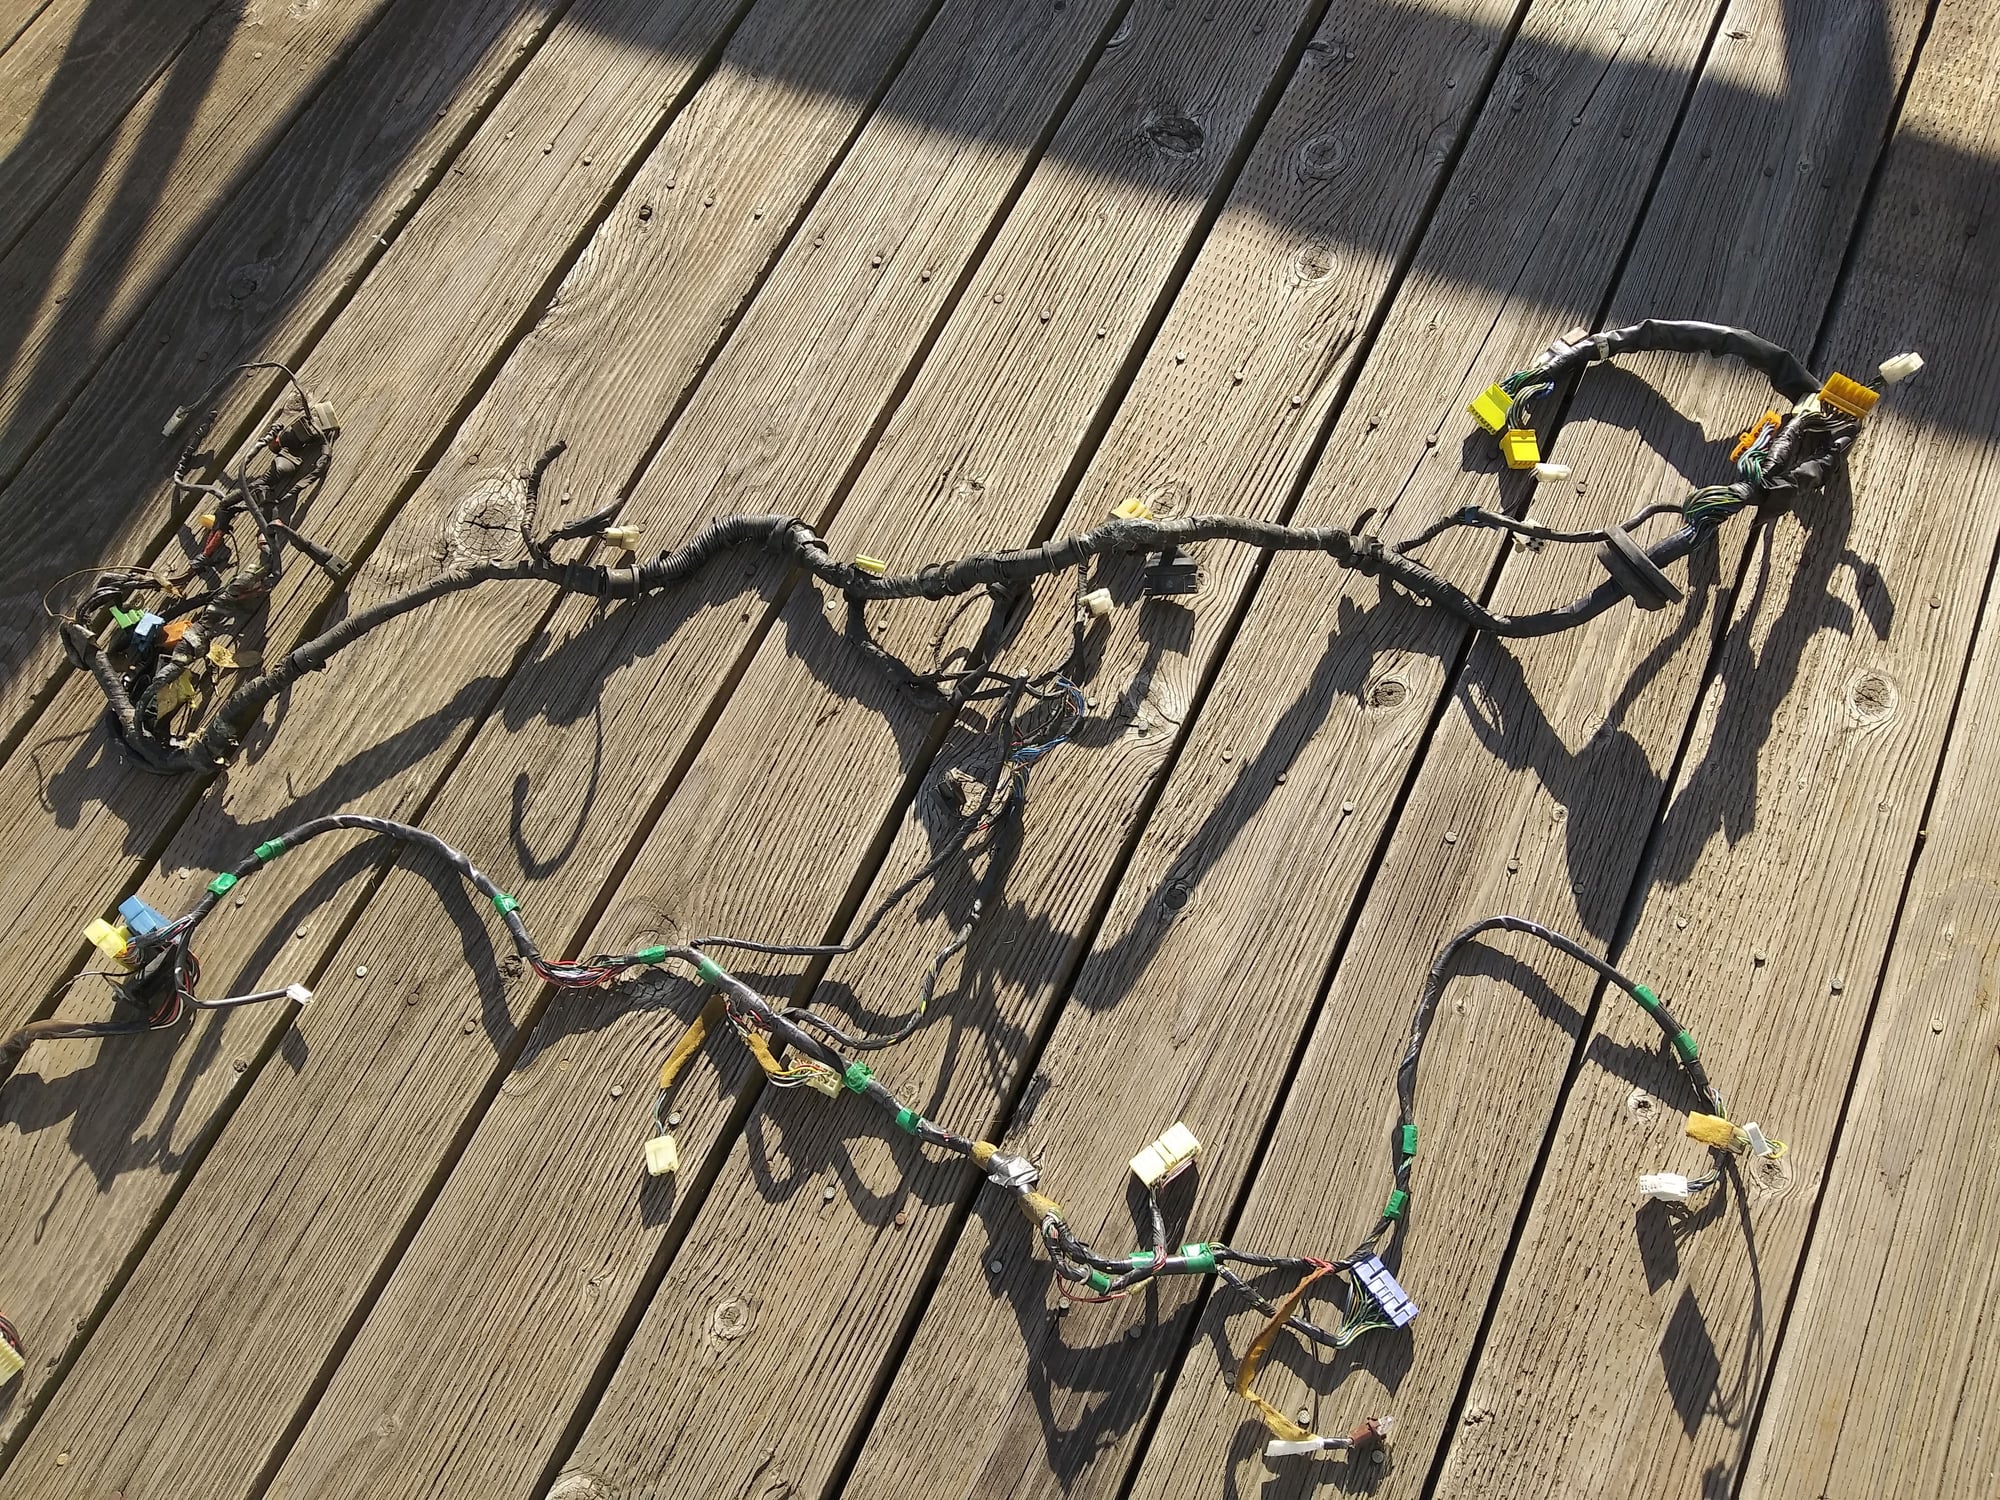 How To Tell Which Wiring Harness Do I Have - RX7Club.com - Mazda RX7 Forum